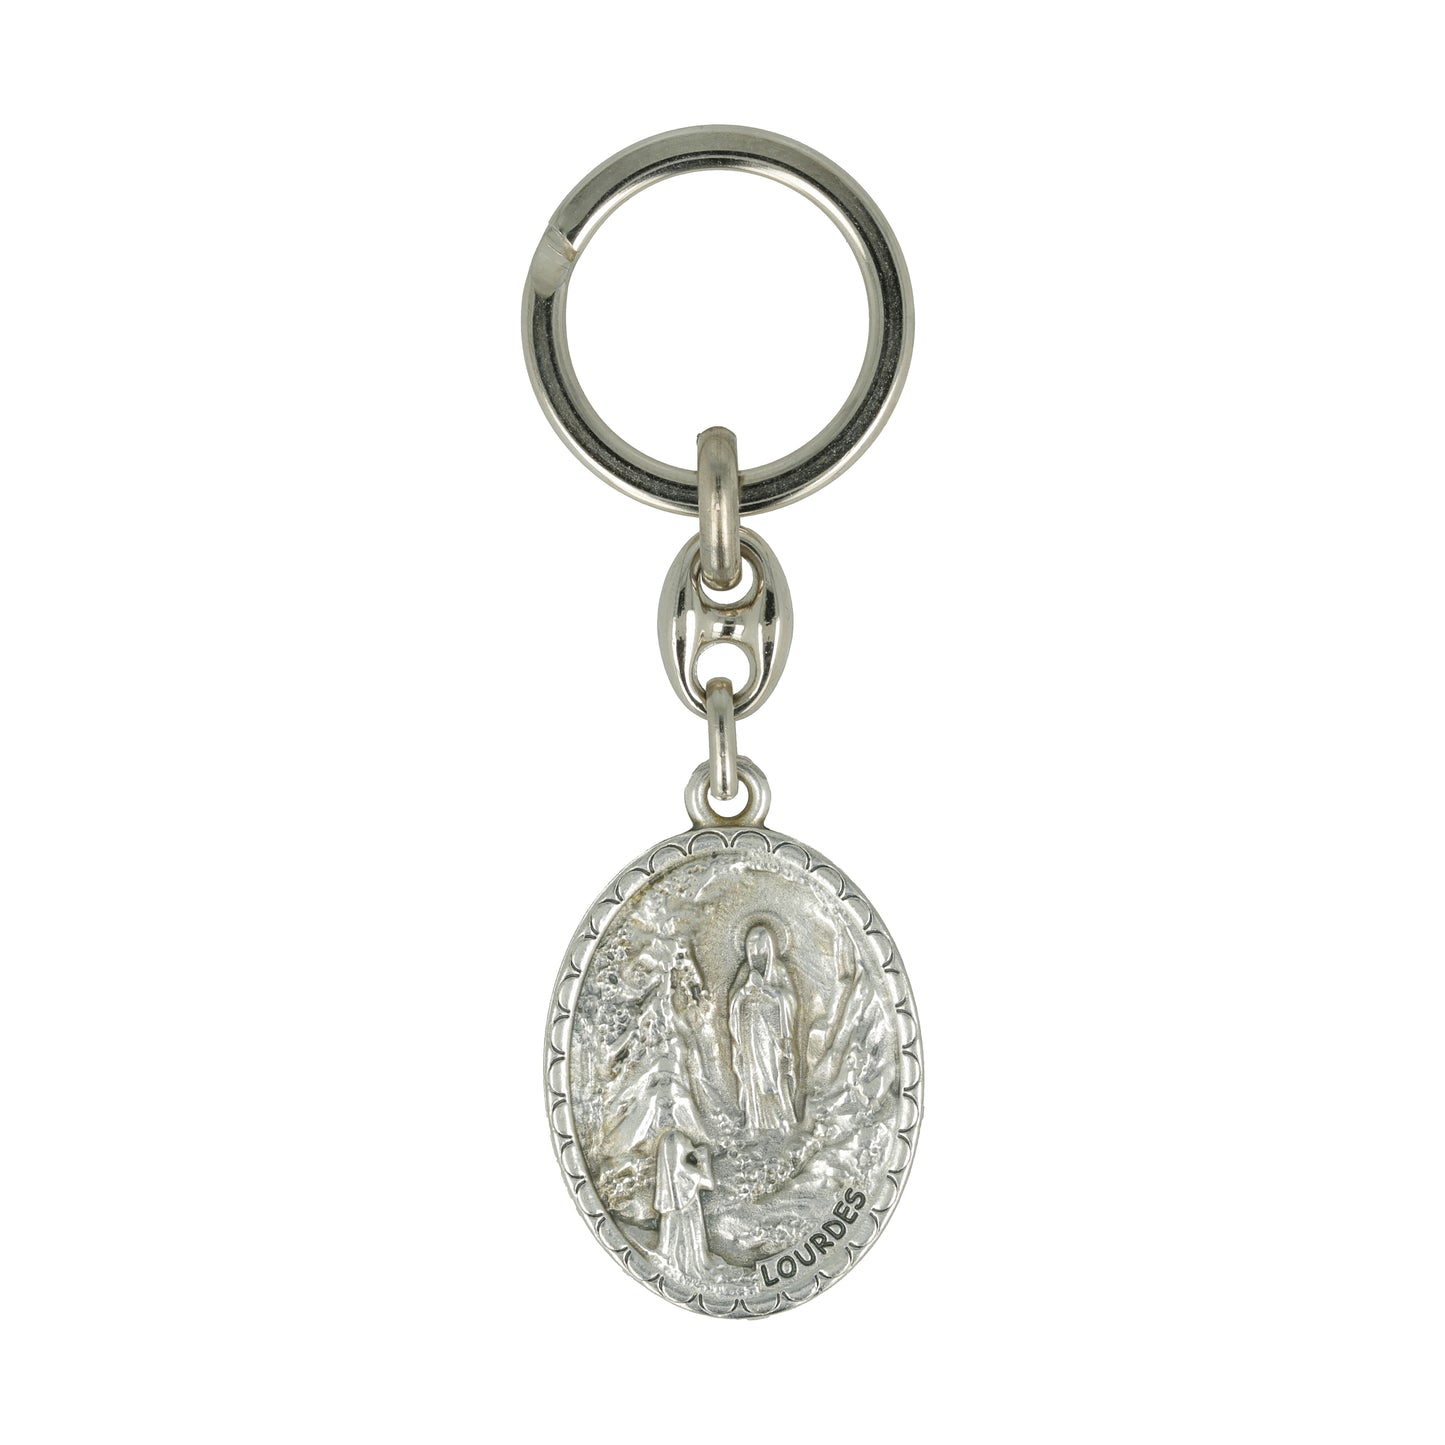 Keychain Bell San Benito Nickel Plated . Souvenirs from Italy